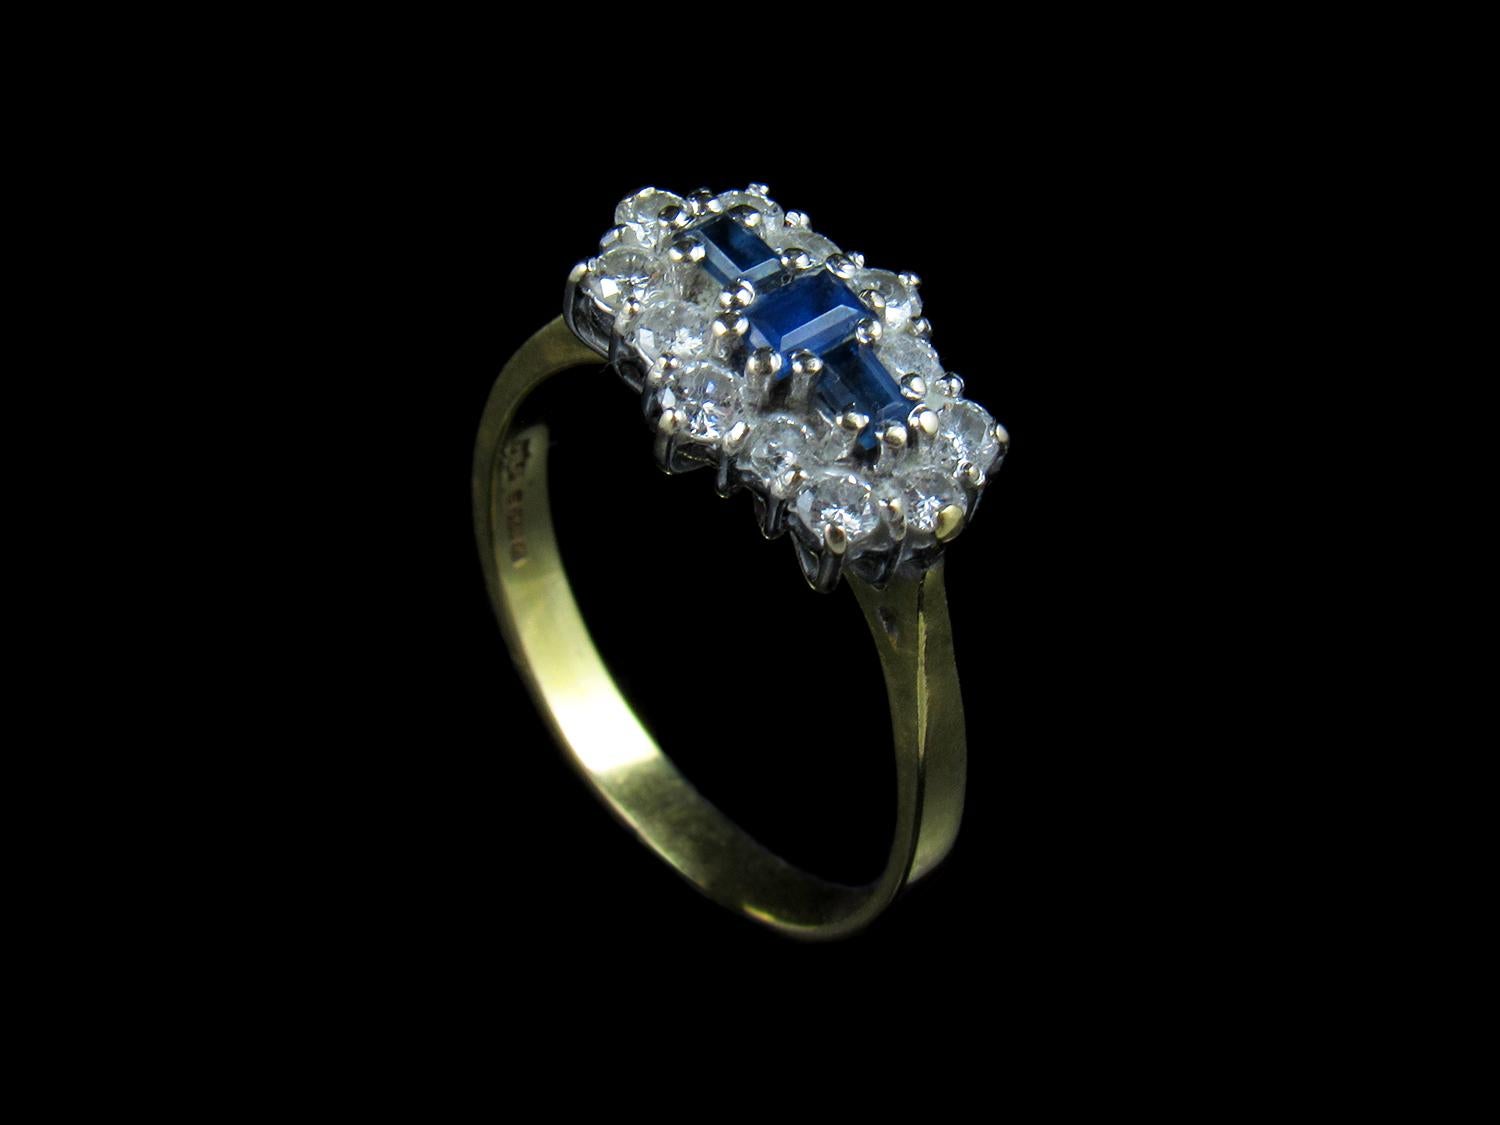 A beautiful sapphire and diamond ring.

In the centre are three baguette cut strong and bright blue sapphires (one 3mm x 4mm and two 3mm x 2mm) encircled by ten crystal clear round brilliant cut diamonds. All the gemstones are original and are